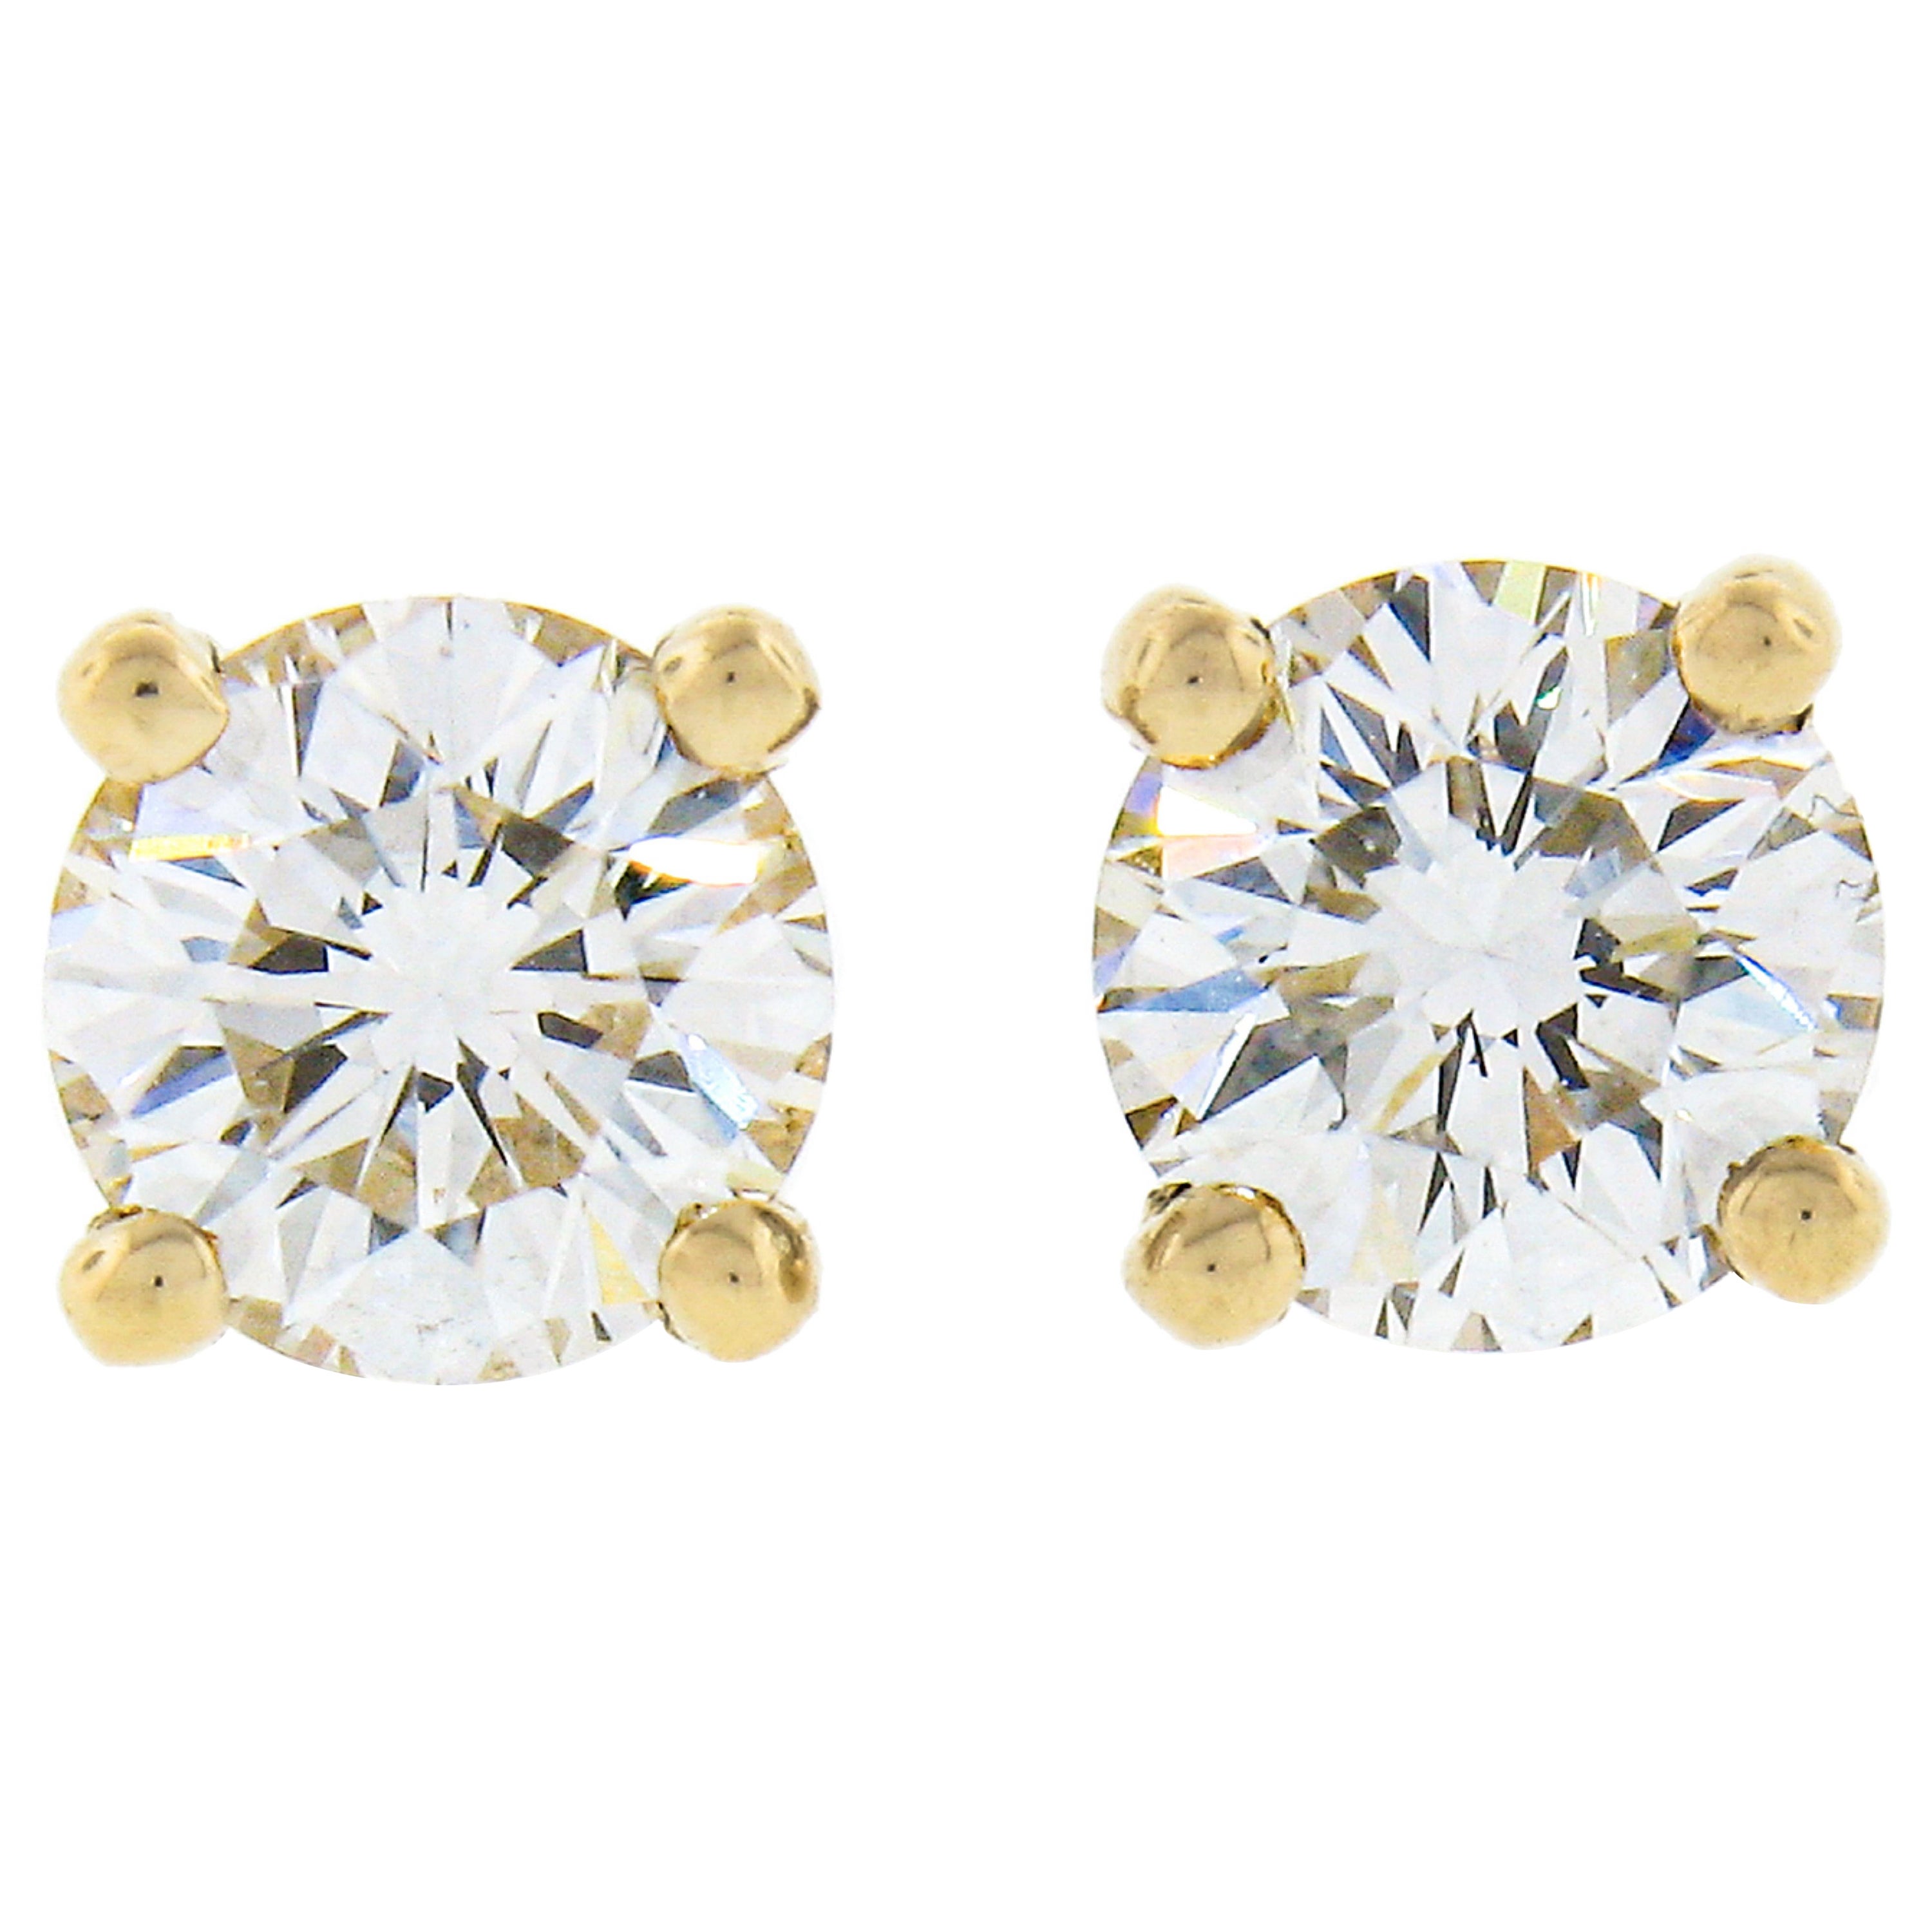 NEW Classic 14k Yellow Gold 0.50ct Round Ideal Cut Diamond 4-Prong Stud Earrings en vente